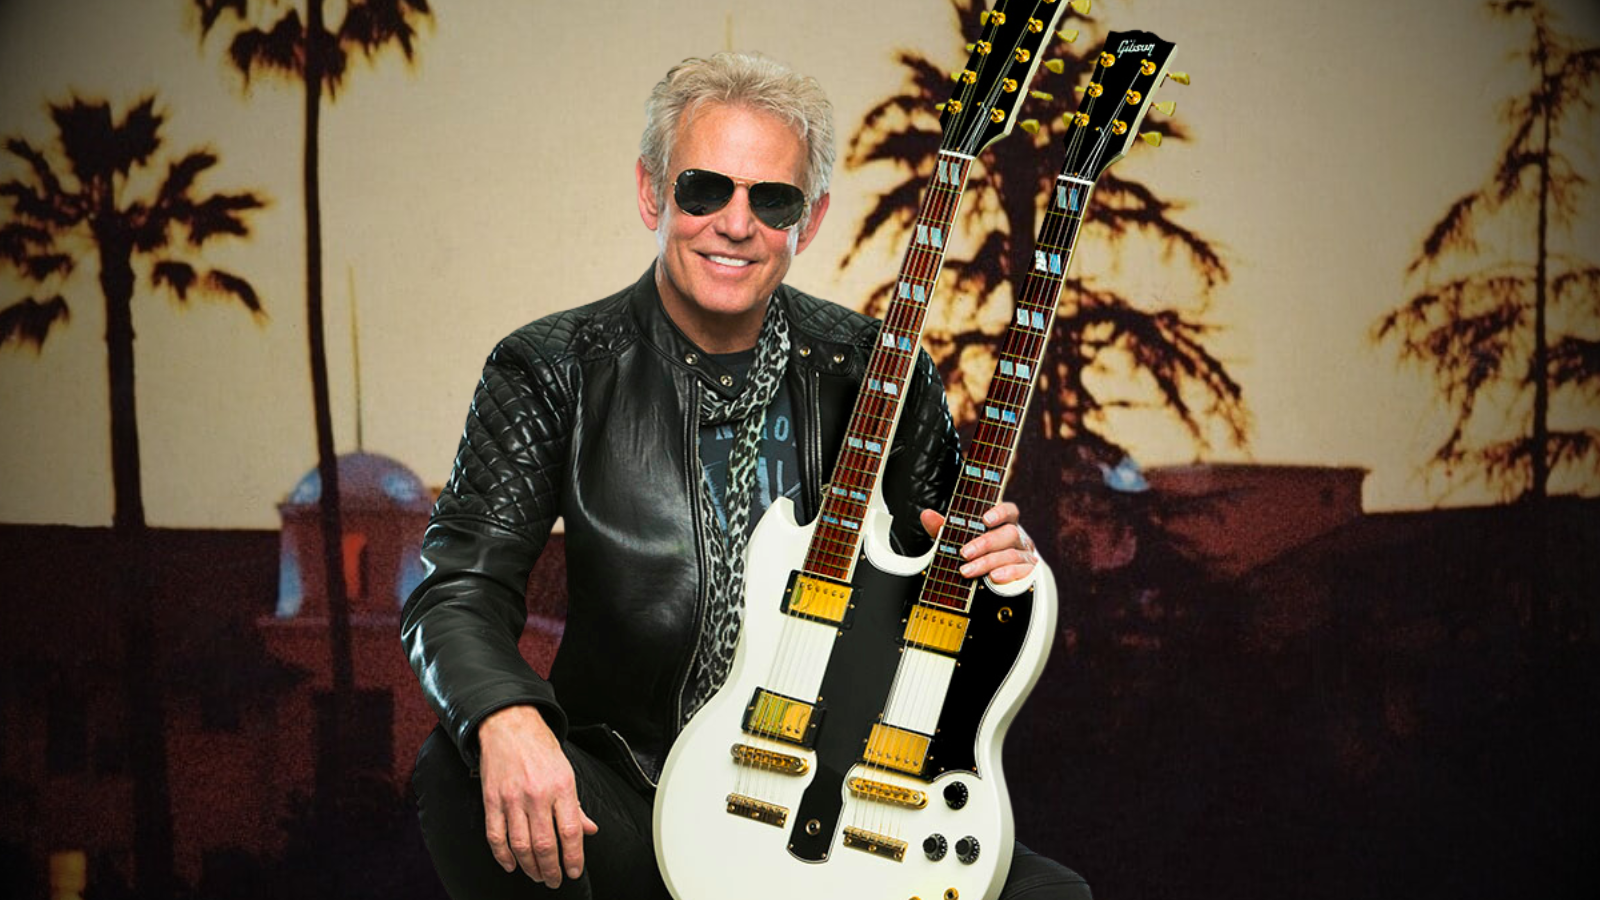 The Story Behind The 'Hotel California' Album Cover Image, According To Don Felder